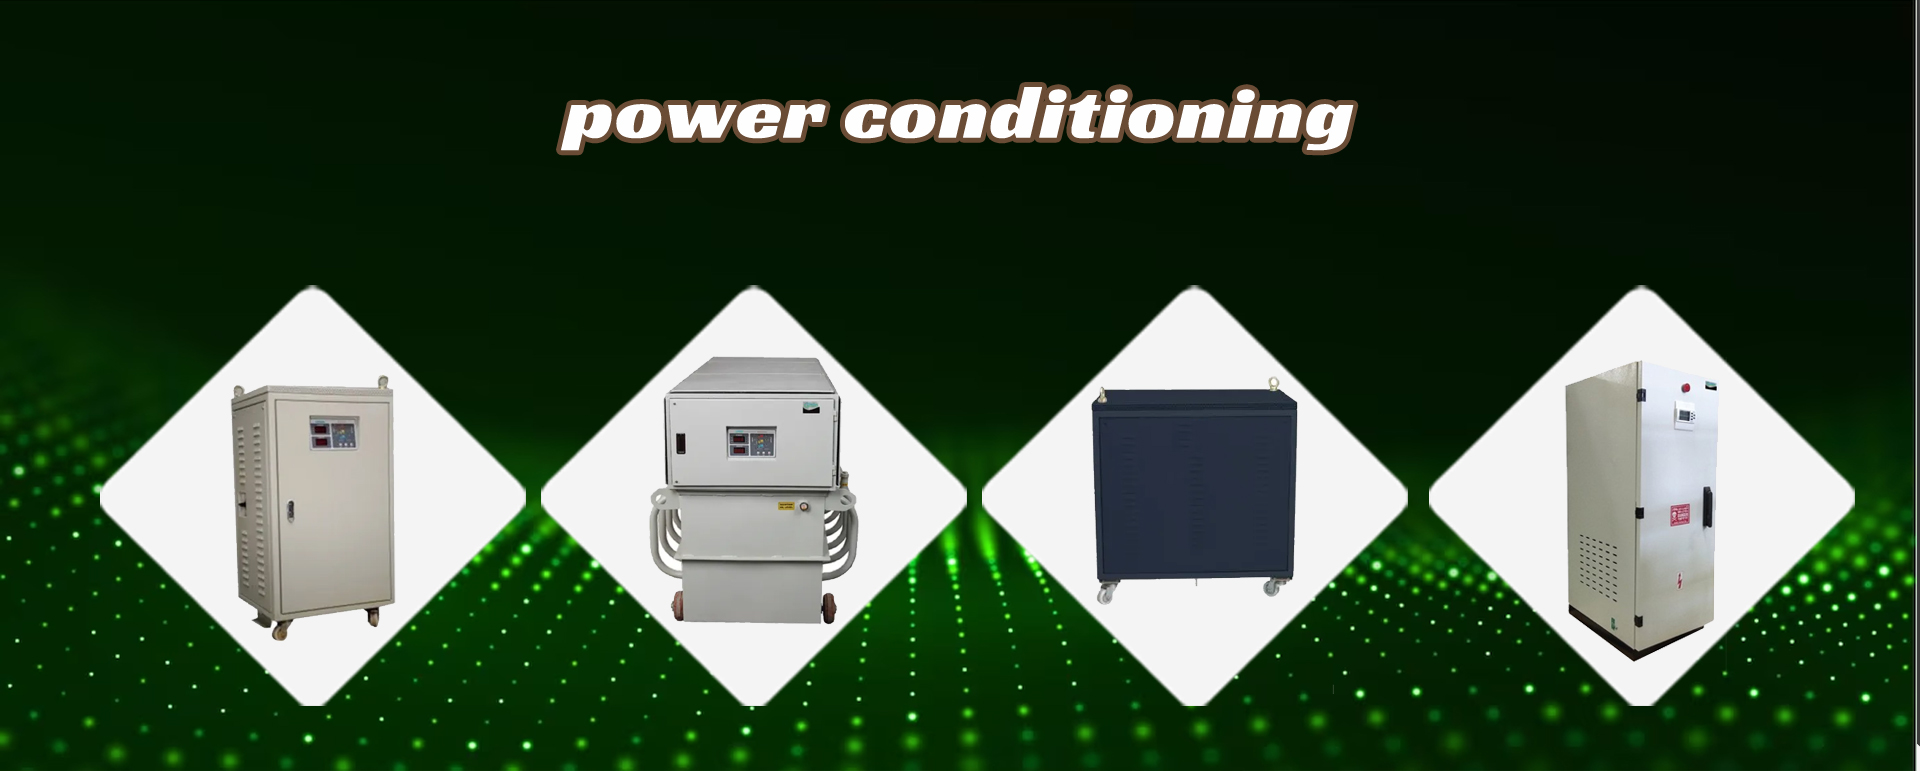 Customised UPS, Air Cooled Servo Stabilizer, Oil Cooled Servo Stabilizer, Ultra-K Rated Isolation Transformer, Isolated Power Systems, Power Conditioning, Special Power Products